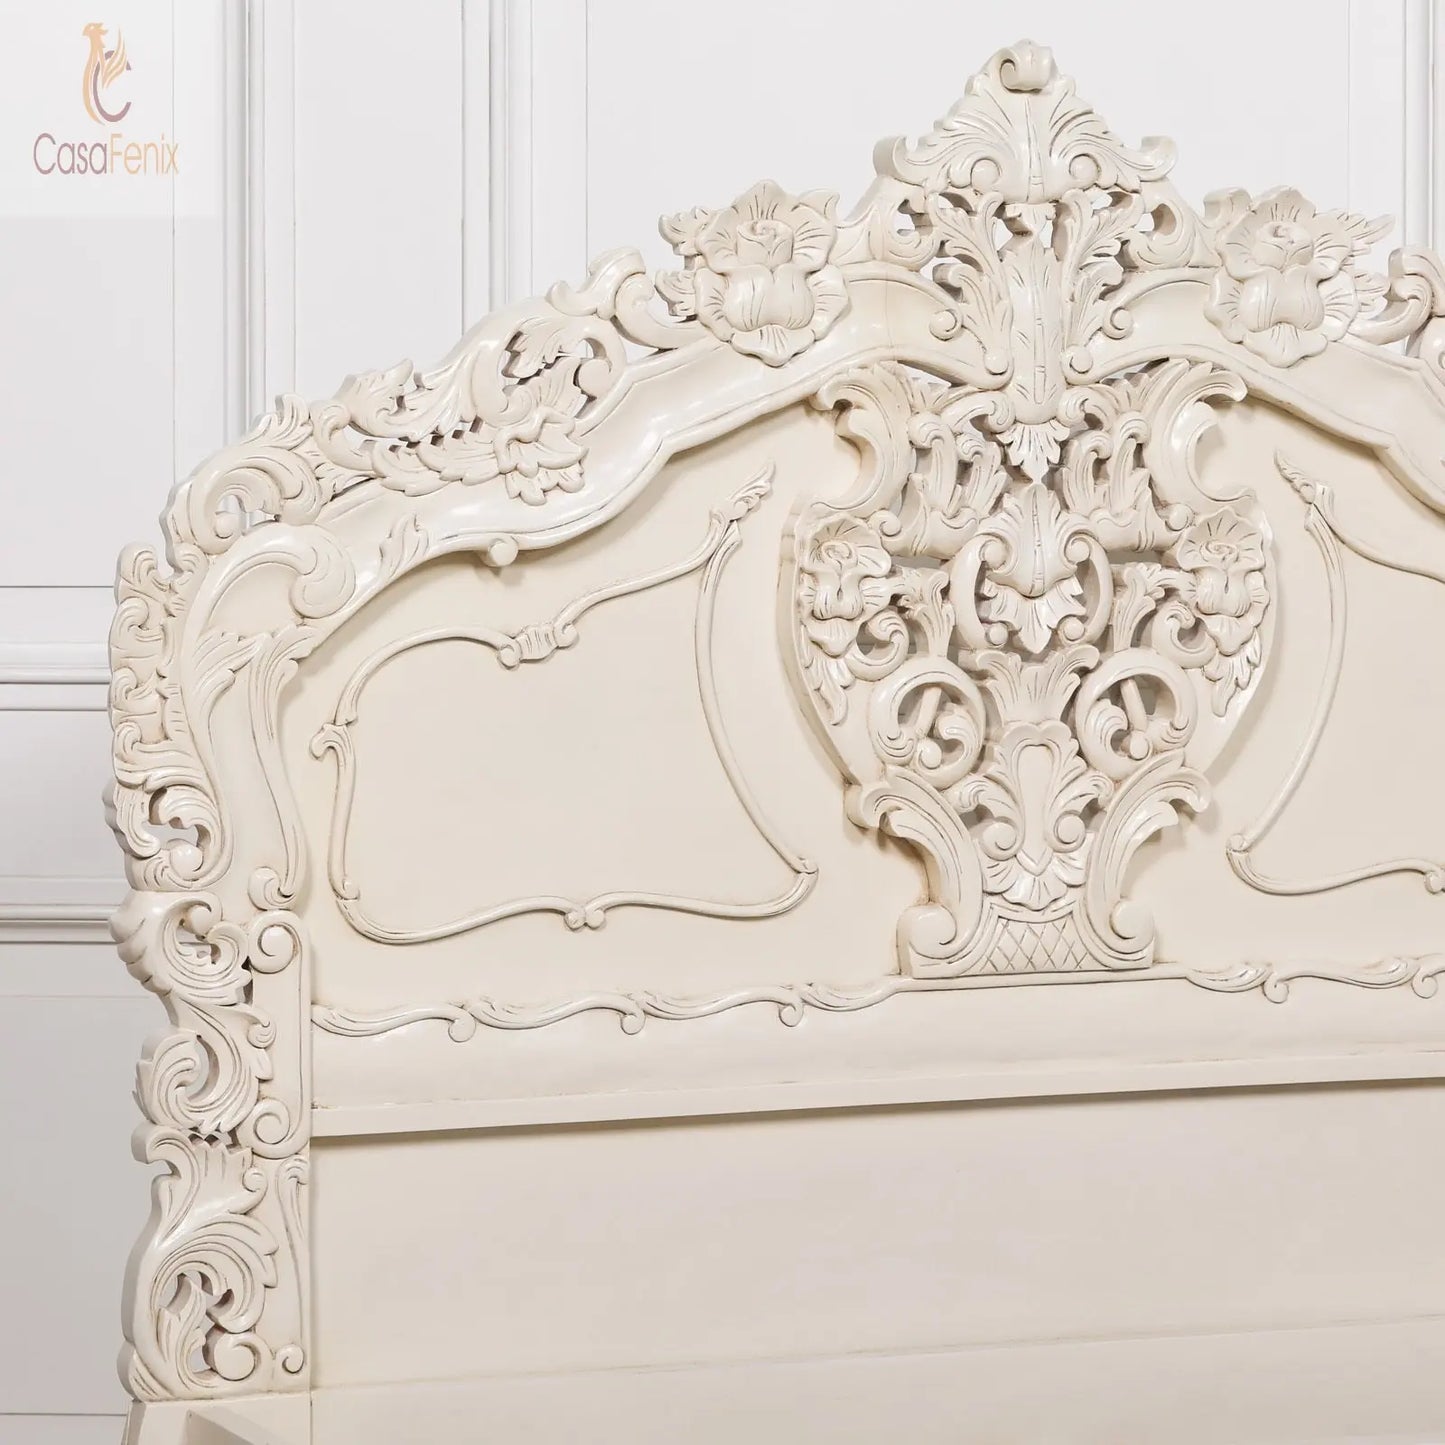 Rococo 4ft6 Double Size Carved Bed Off White Paint Finish - CasaFenix